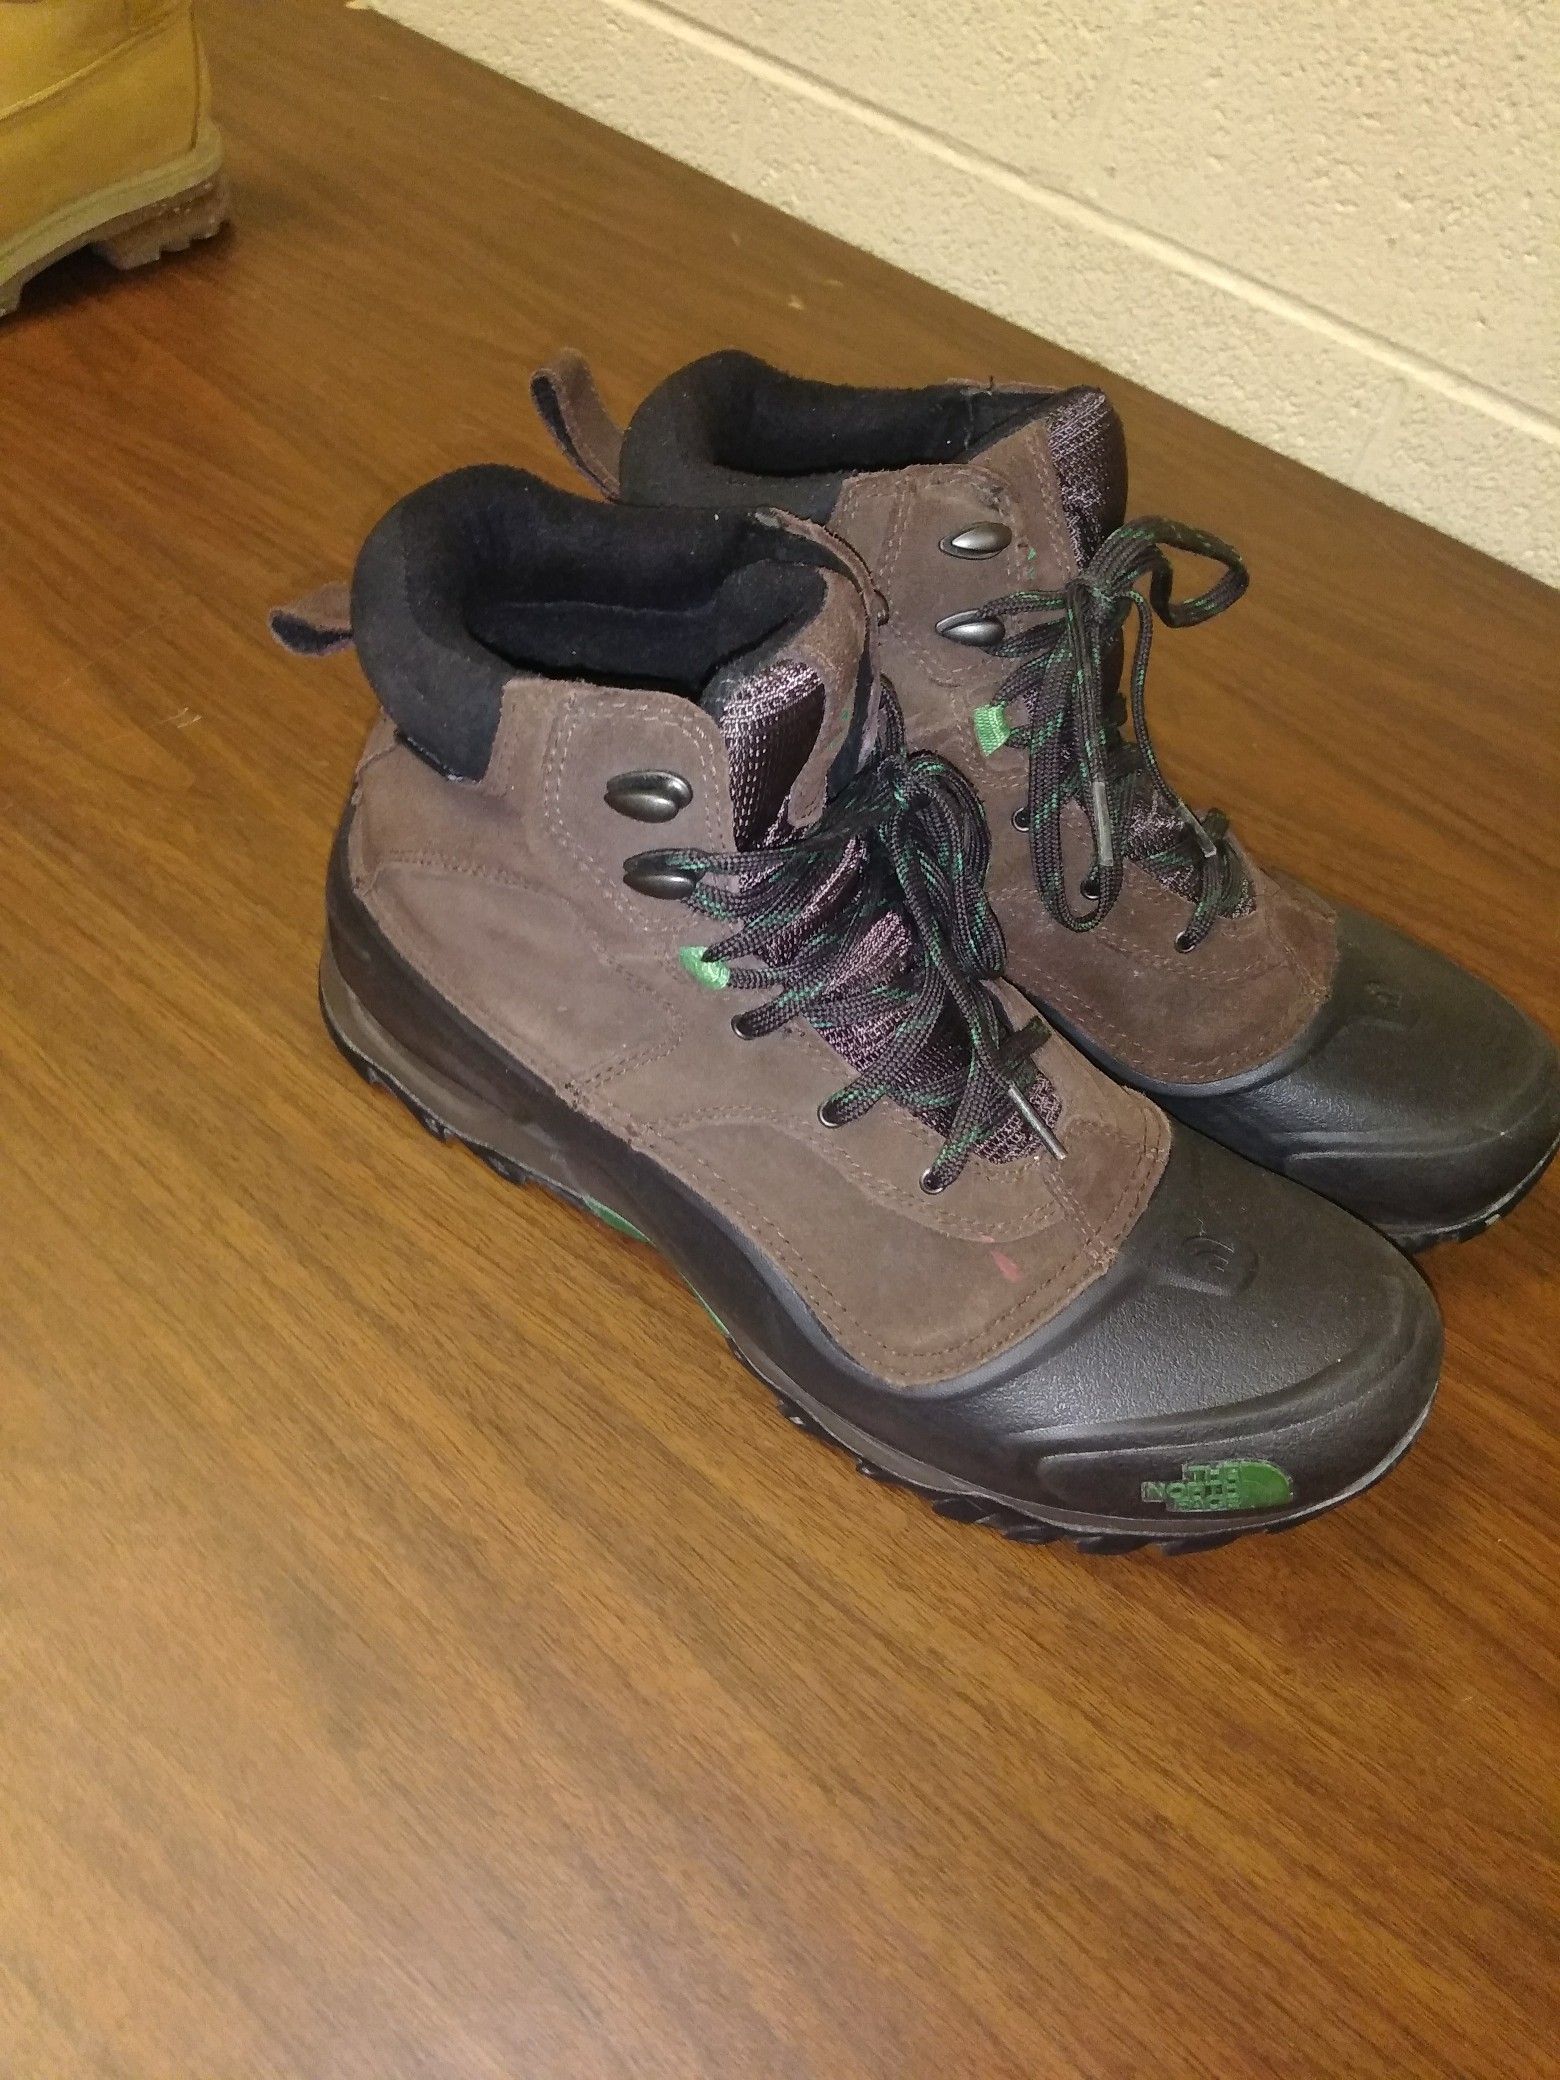 North face Boot Shoes for Sale.